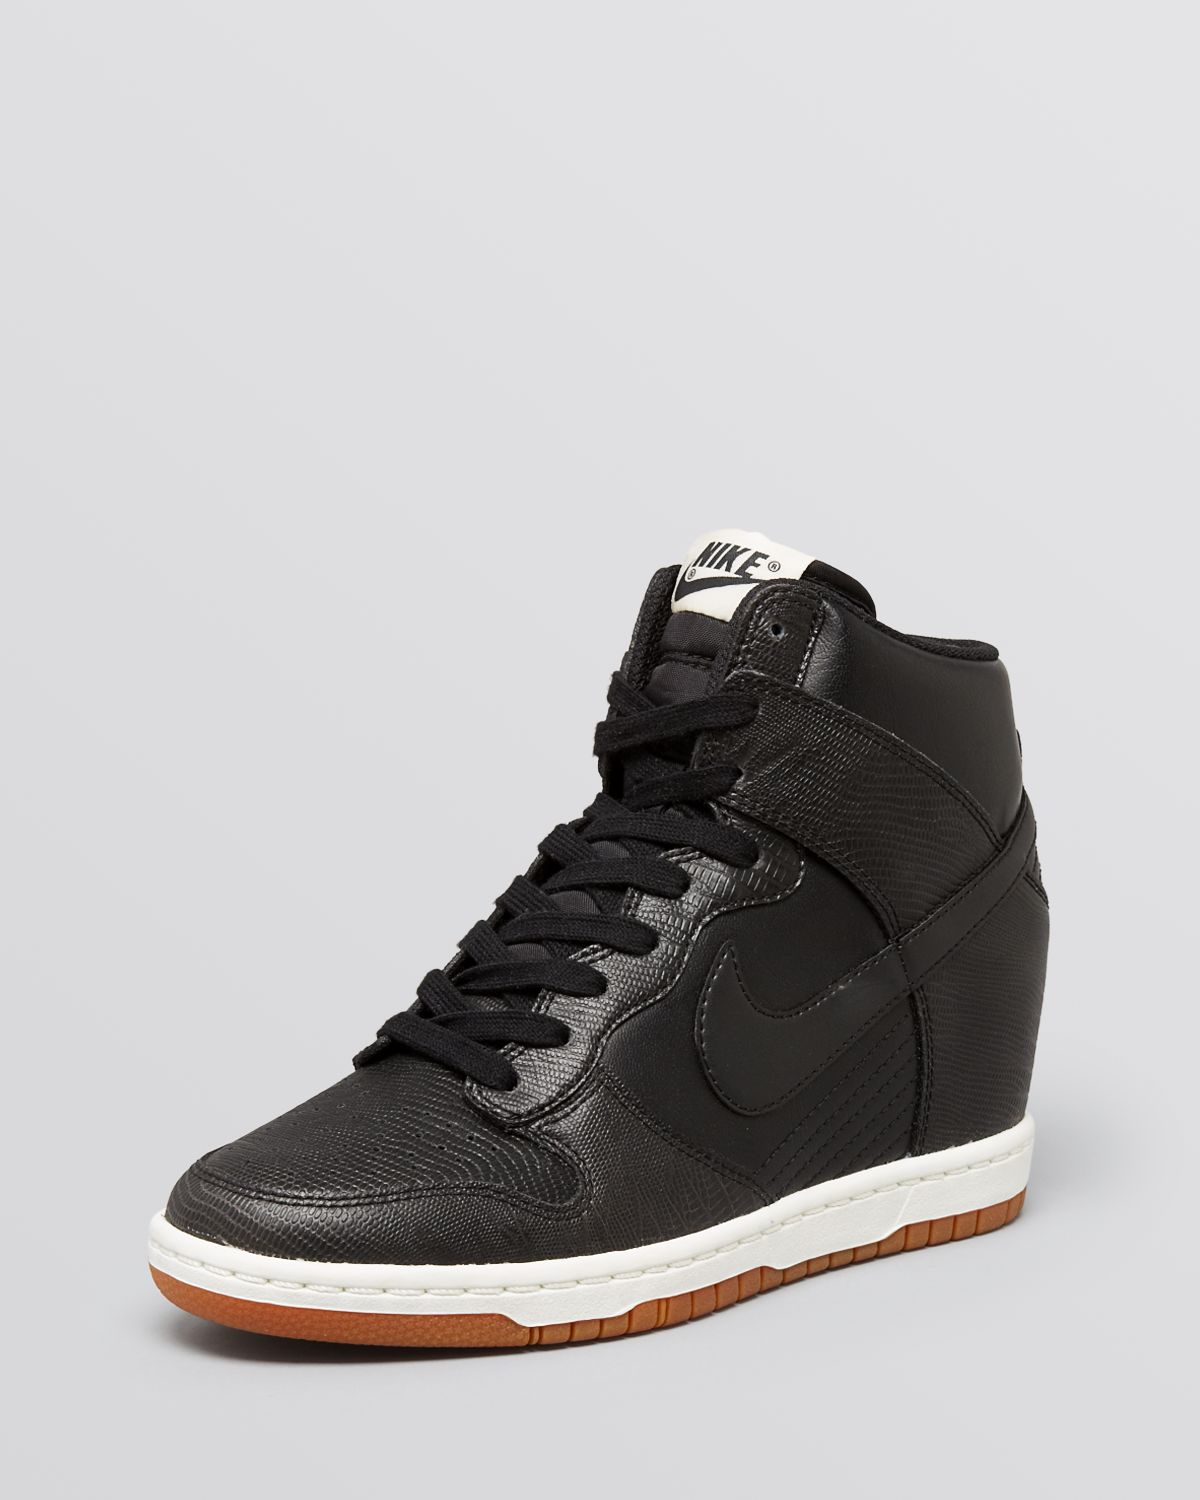 Lyst - Nike Lace Up High Top Wedge Sneakers - Women'S Dunk Sky Hi ...